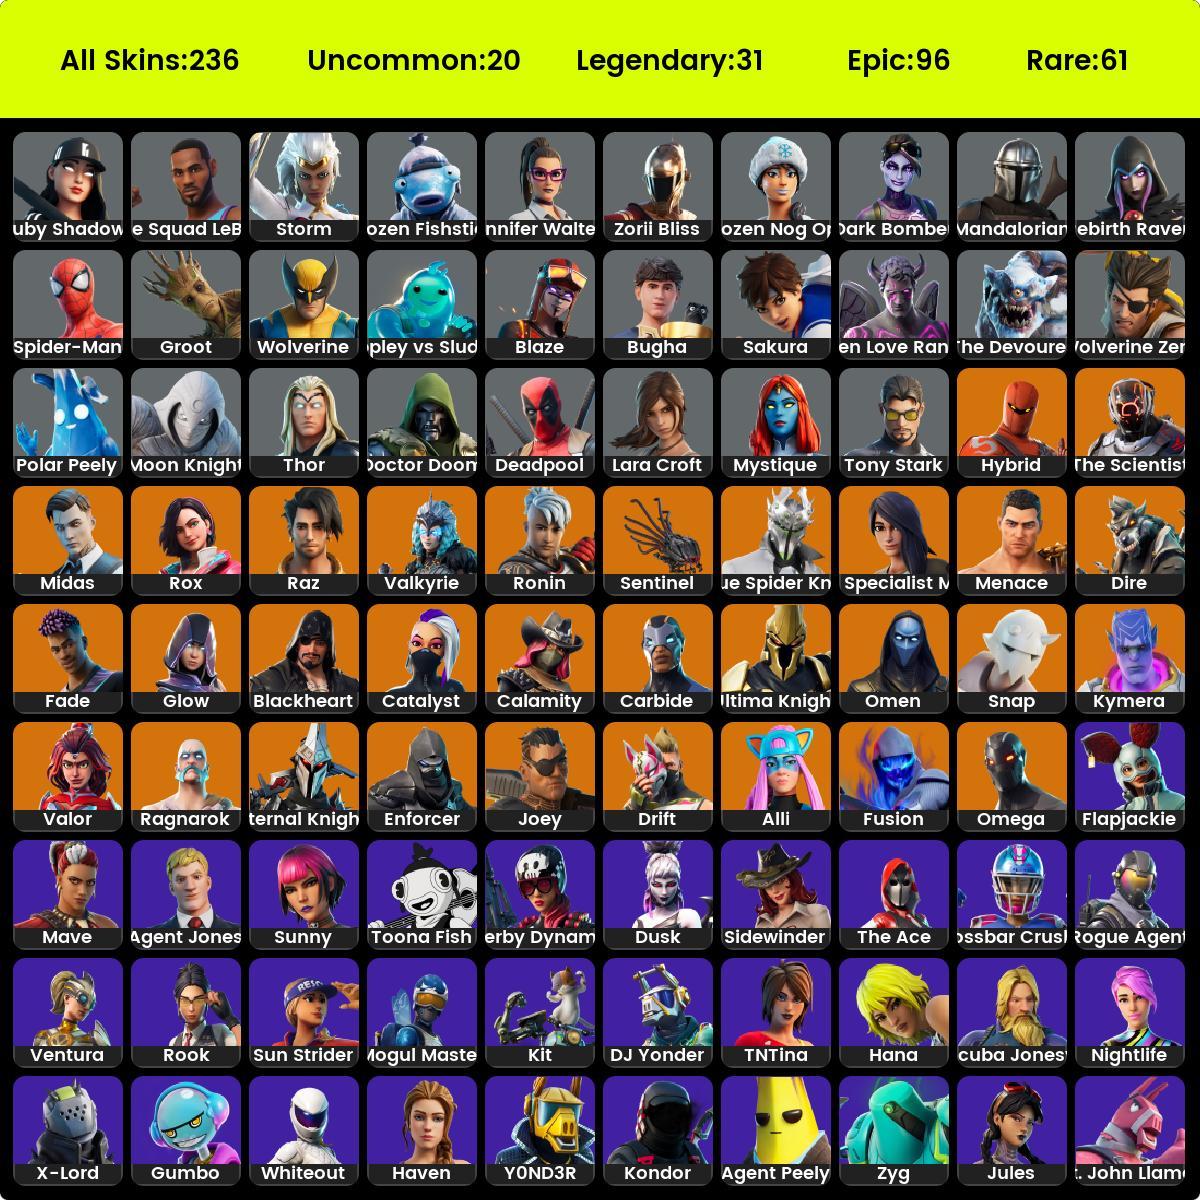 236 skins | Honor Guard | Rogue Spider Knight | Glow | Neo Versa | Blue Team Leader | Leviathan Axe | Freestylin | Point Patroll Rare Emotes